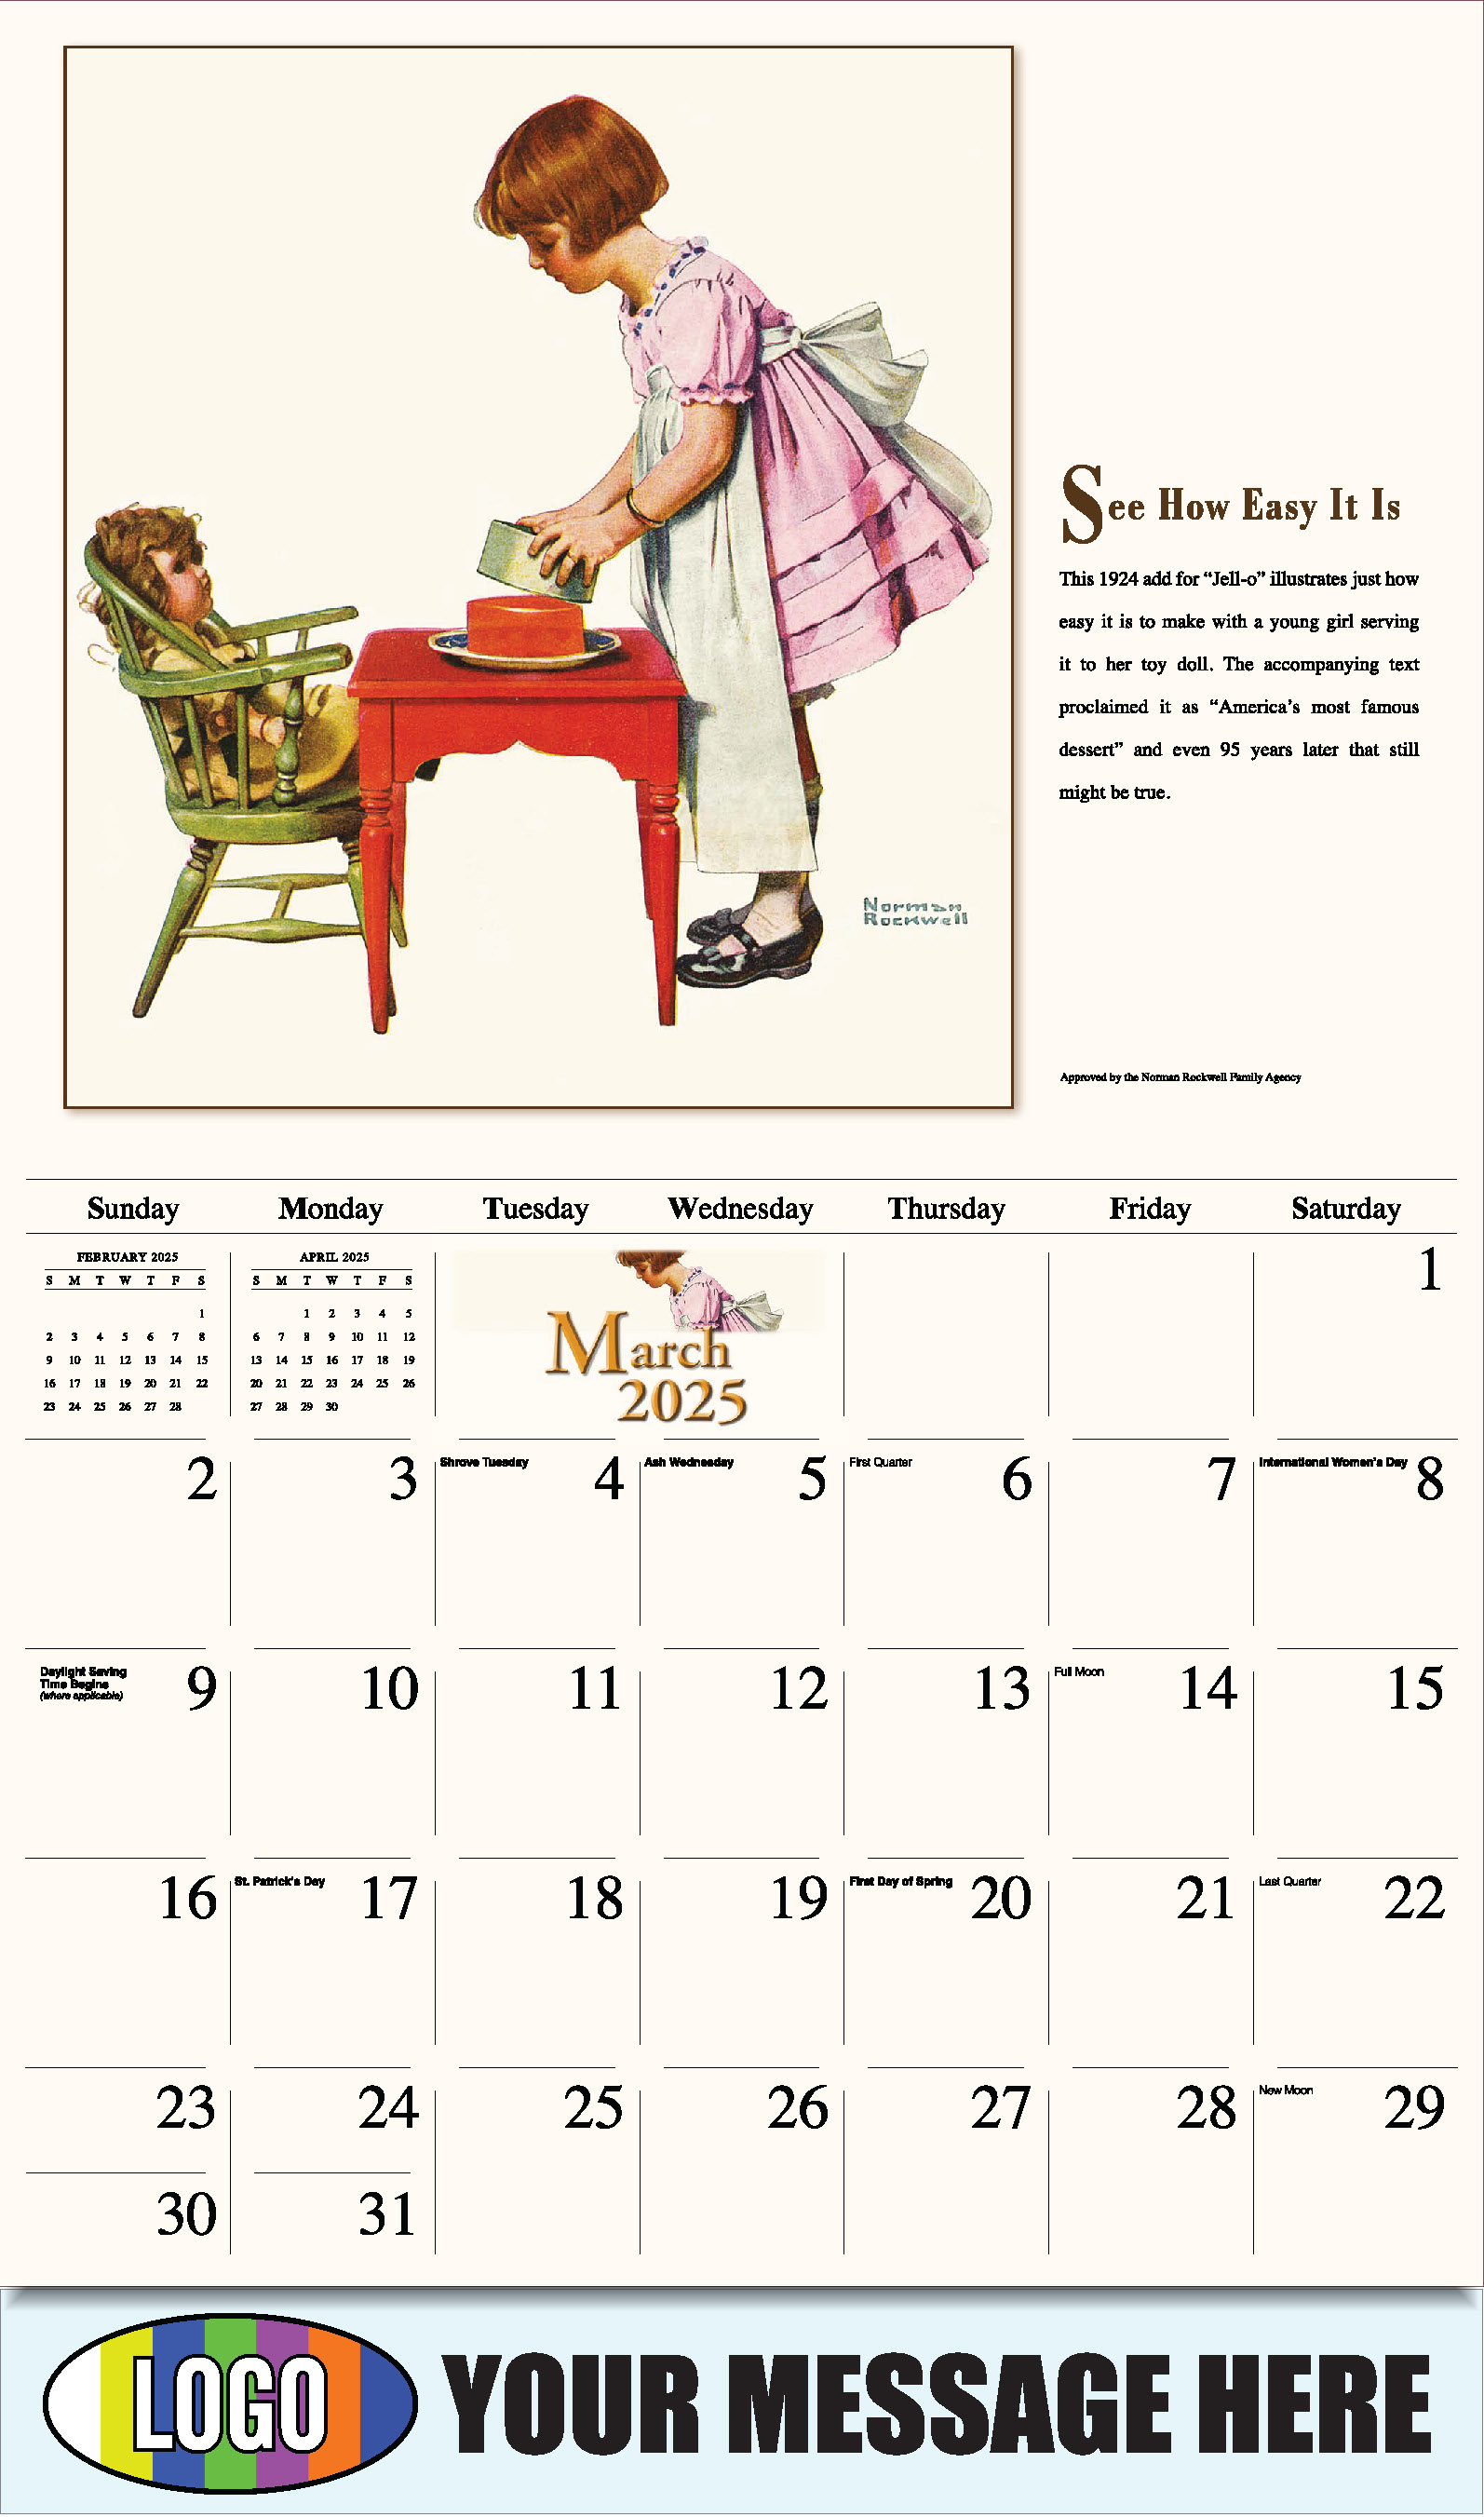 Memorable Images by Norman Rockwell 2025 Business Promotional Wall Calendar - March